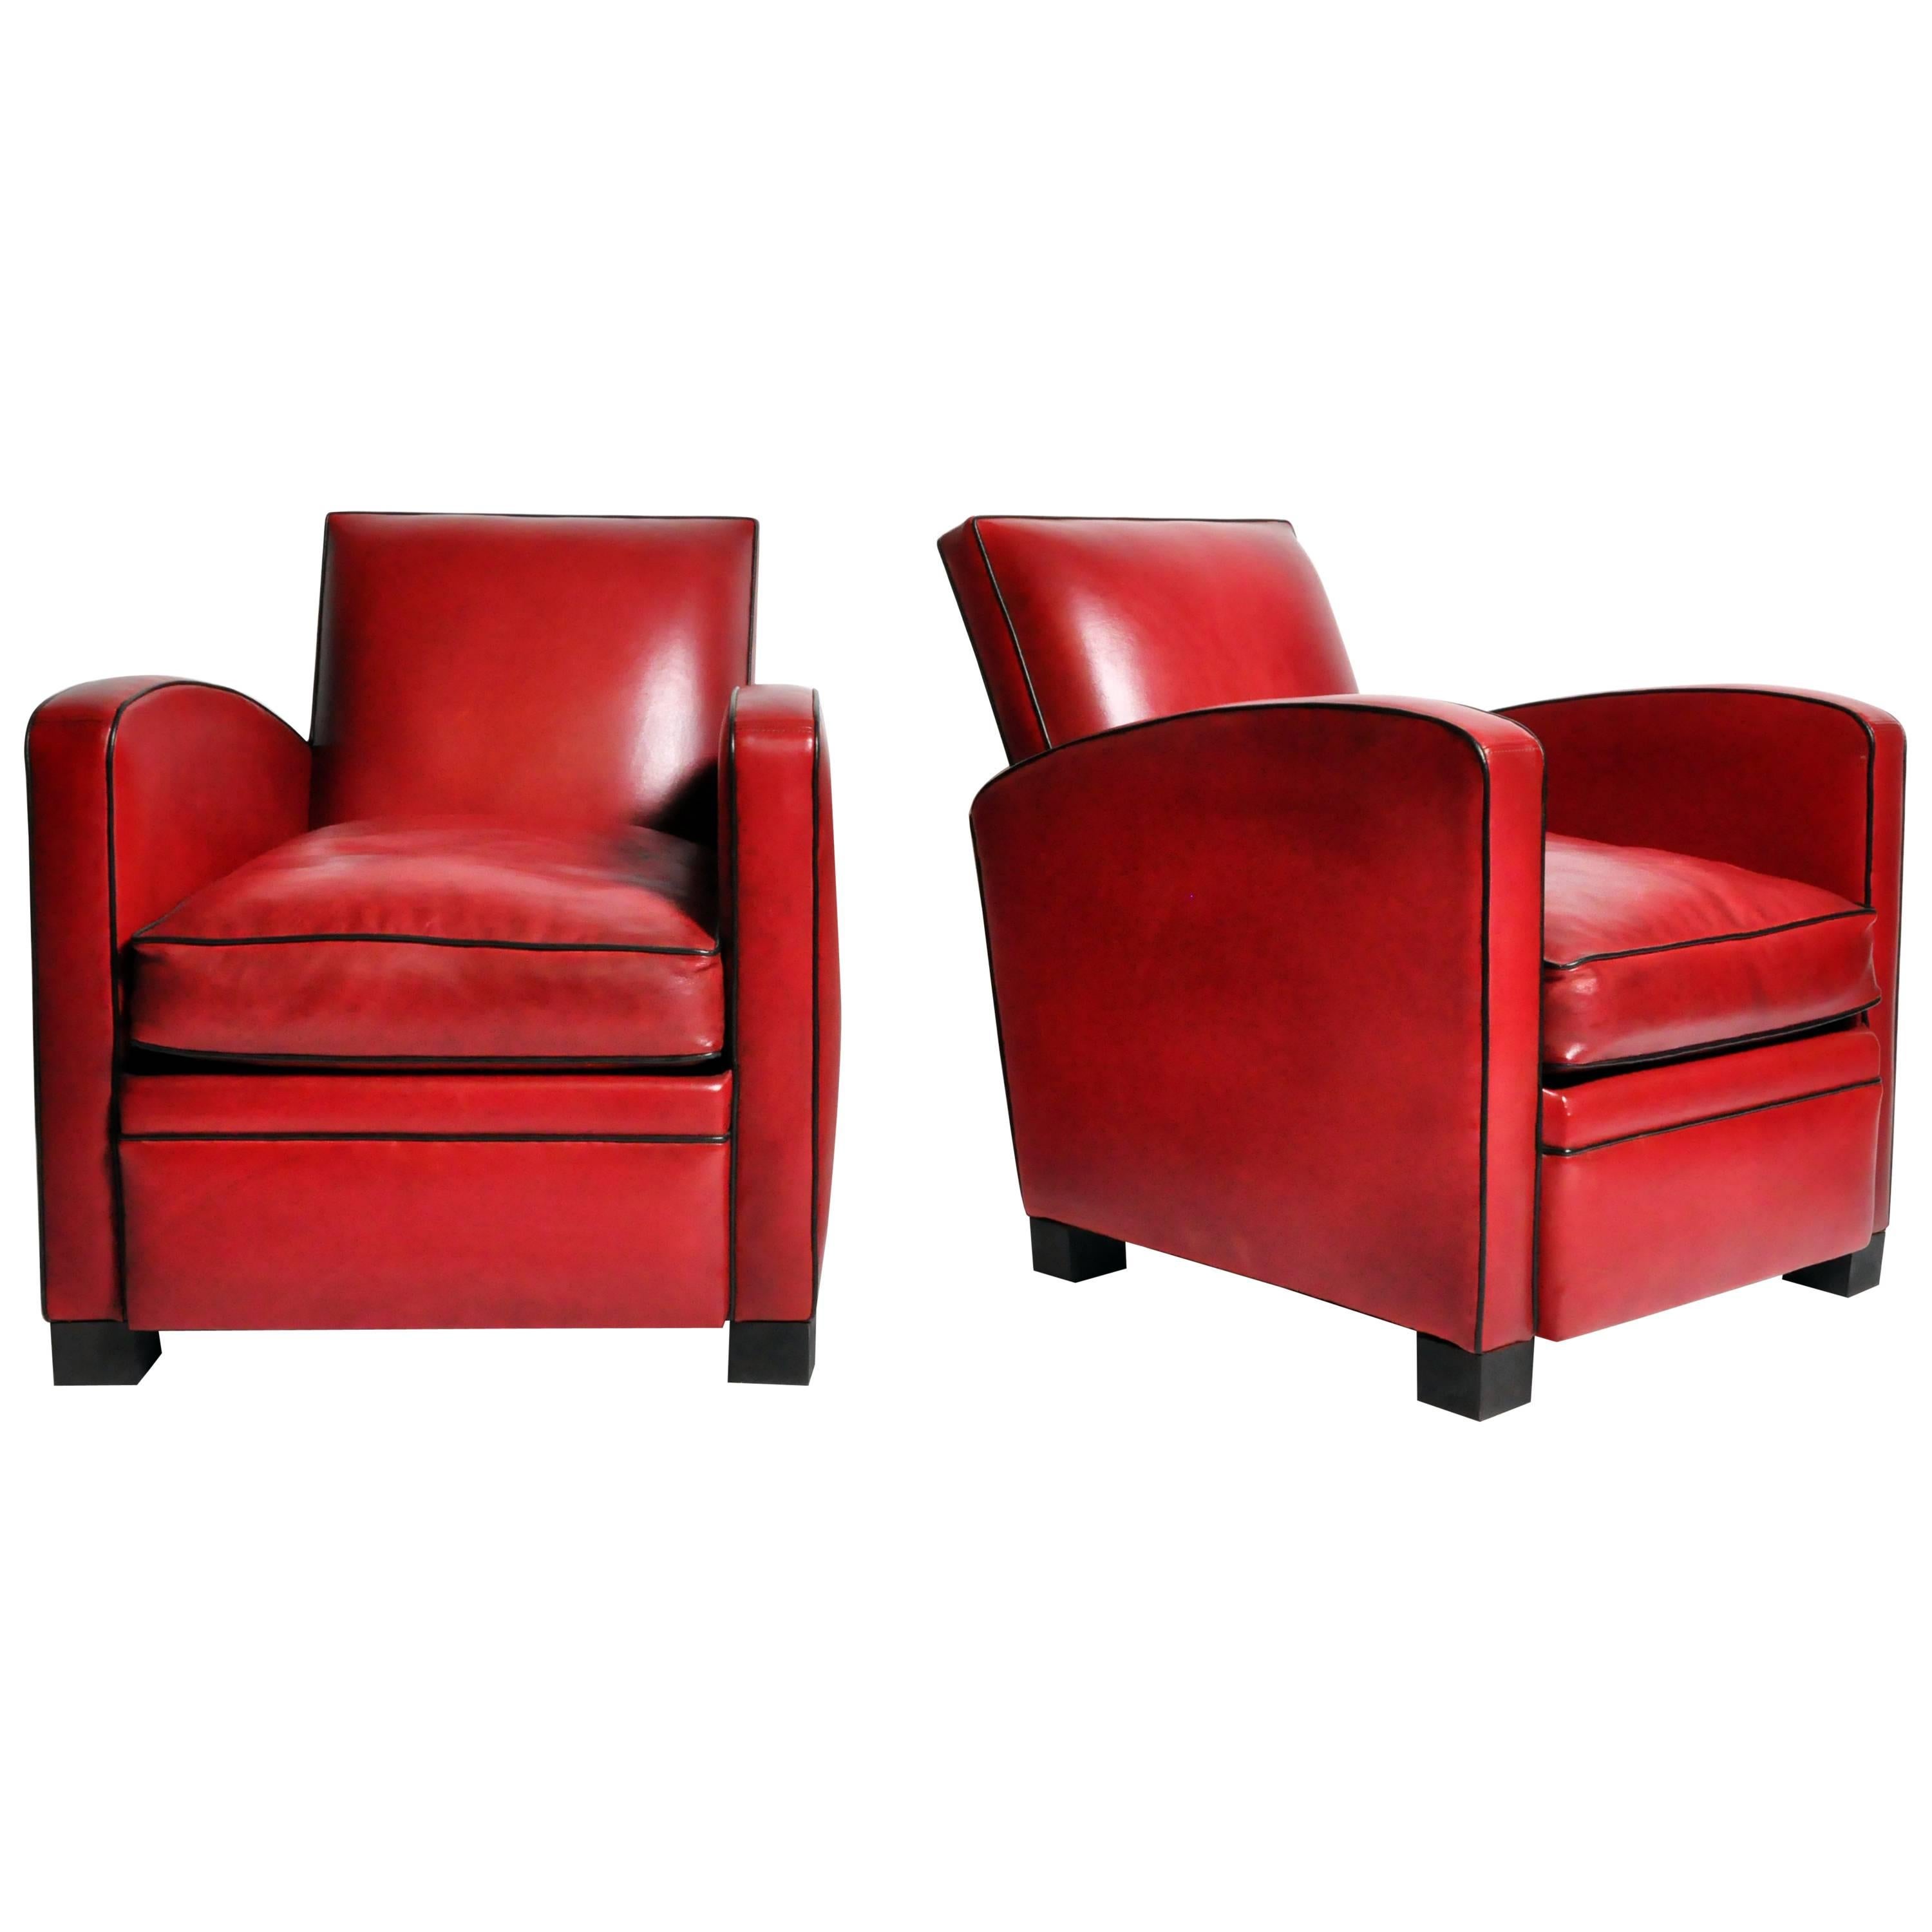 Pair of Parisian Red Leather Club Chairs with Black Piping